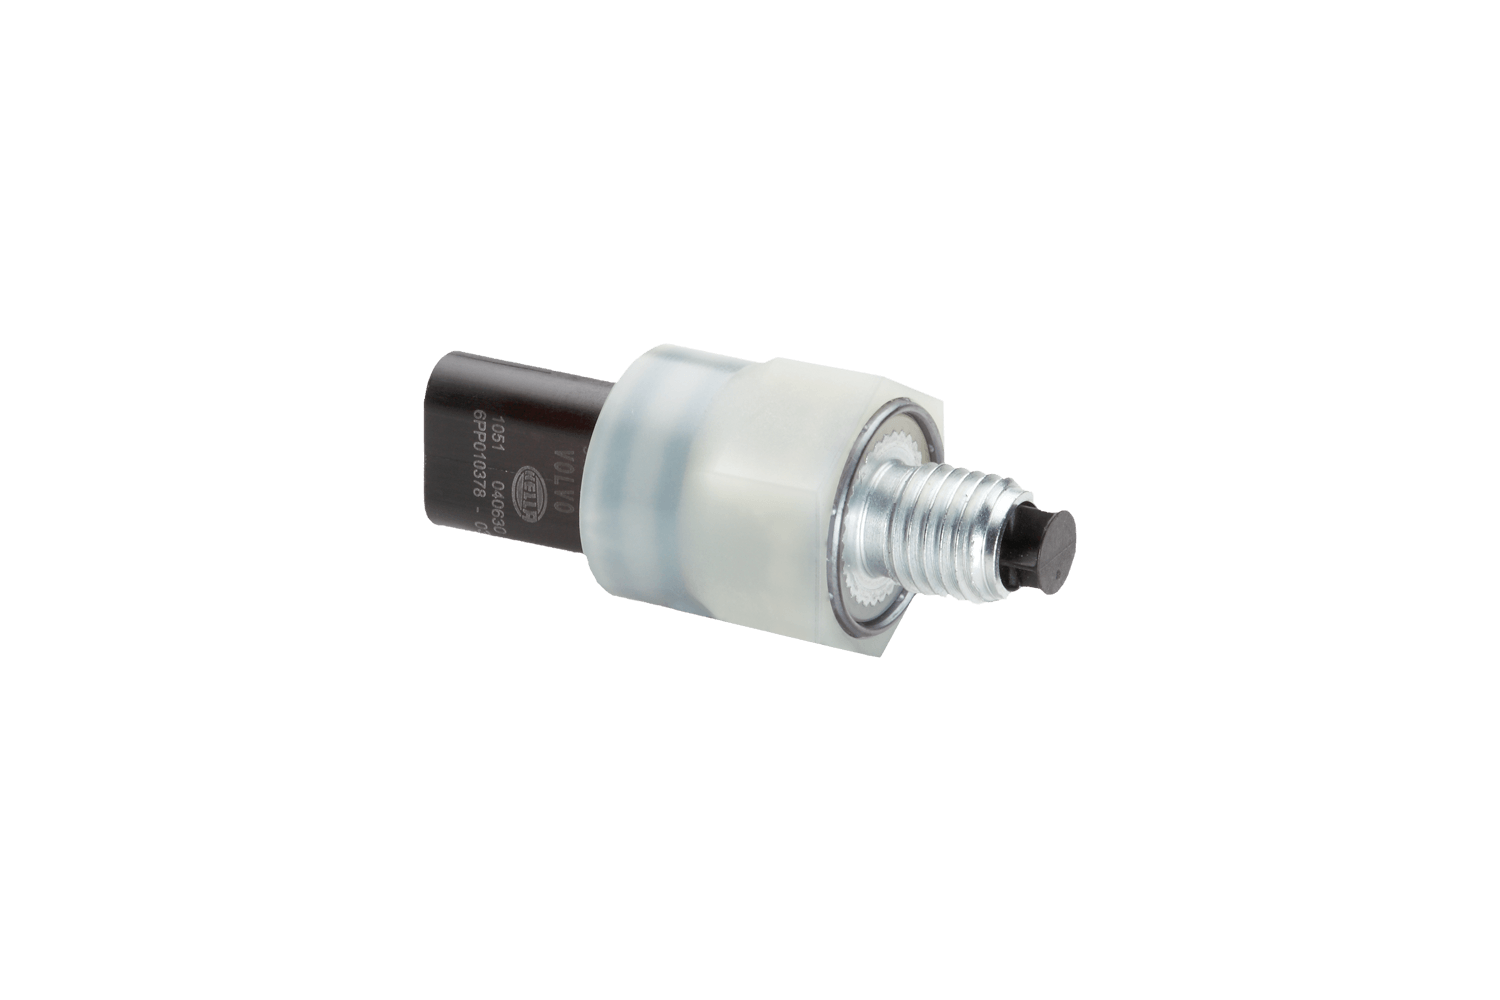 Oil pressure and temperature sensors from Hella offered by Patlon